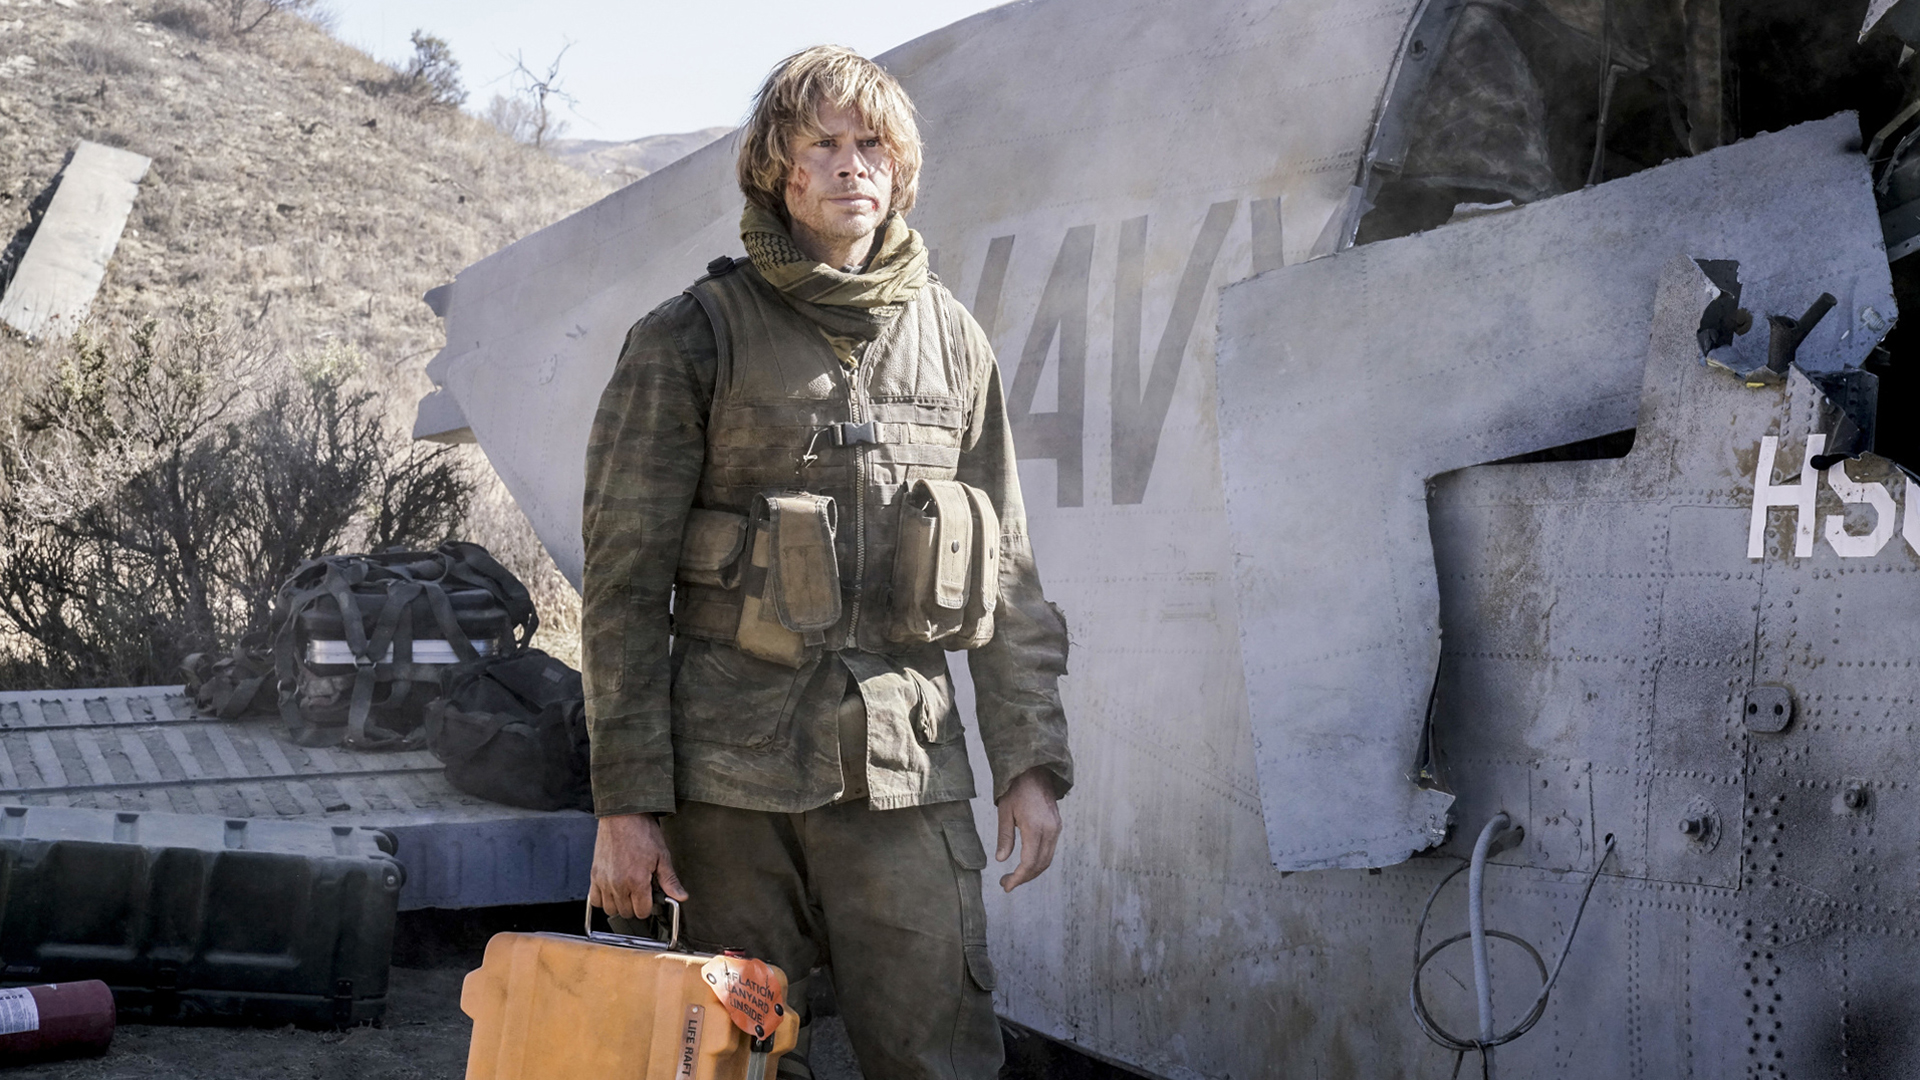 Deeks grabs some gear to get out of danger.